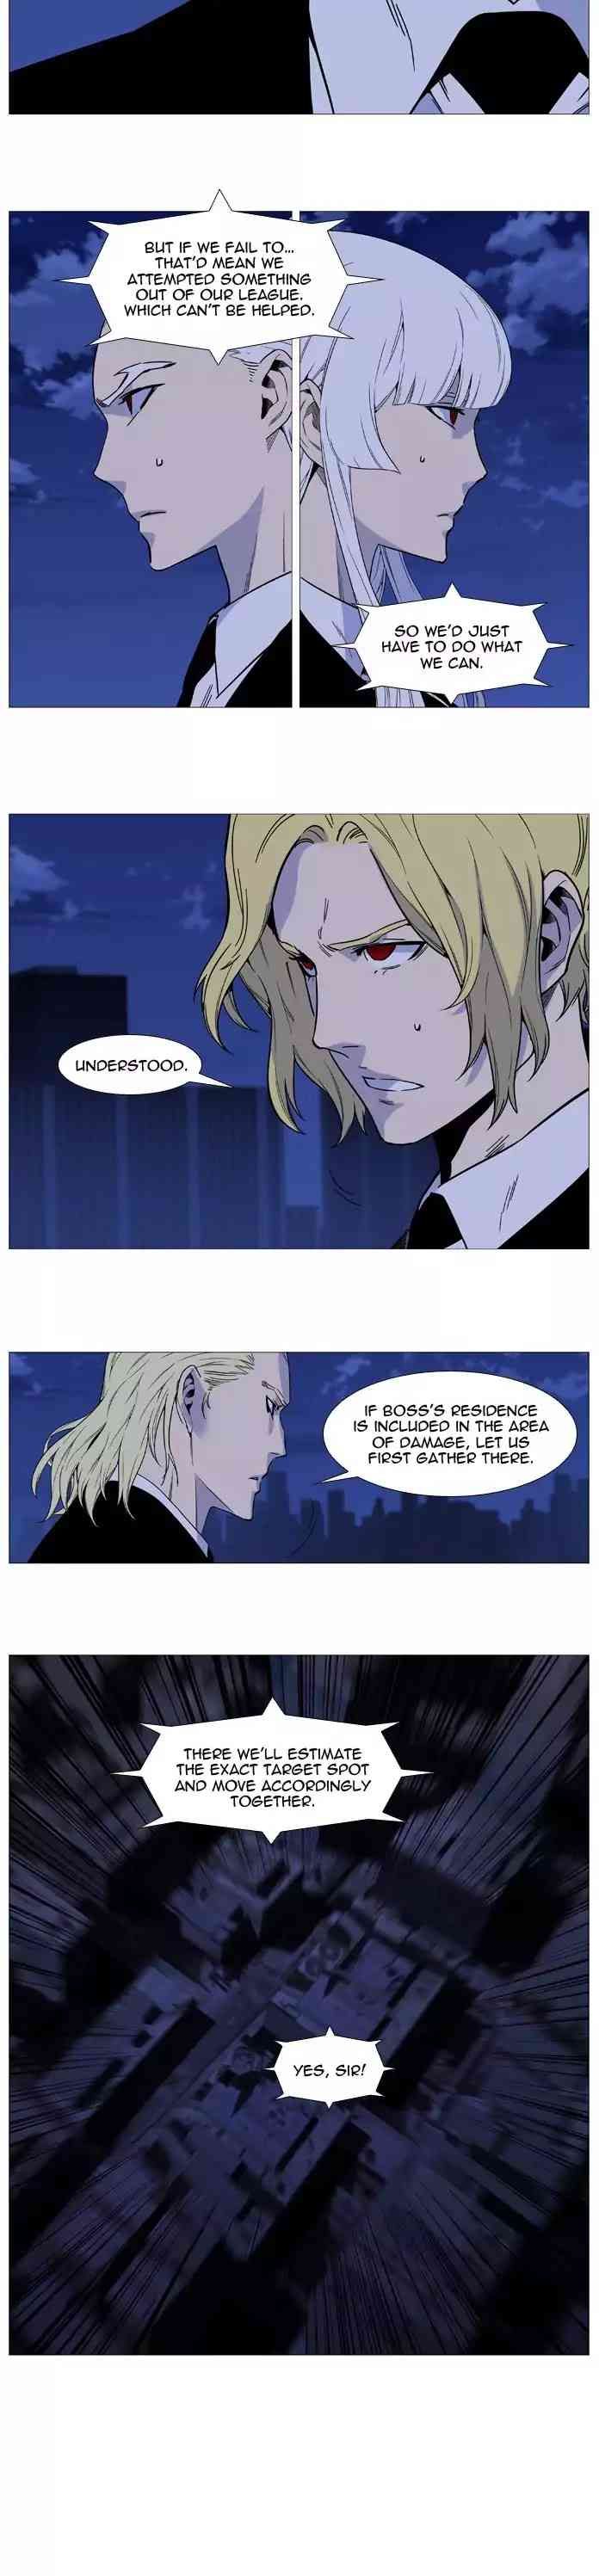 Noblesse Chapter 526_ Ep.525 page 4